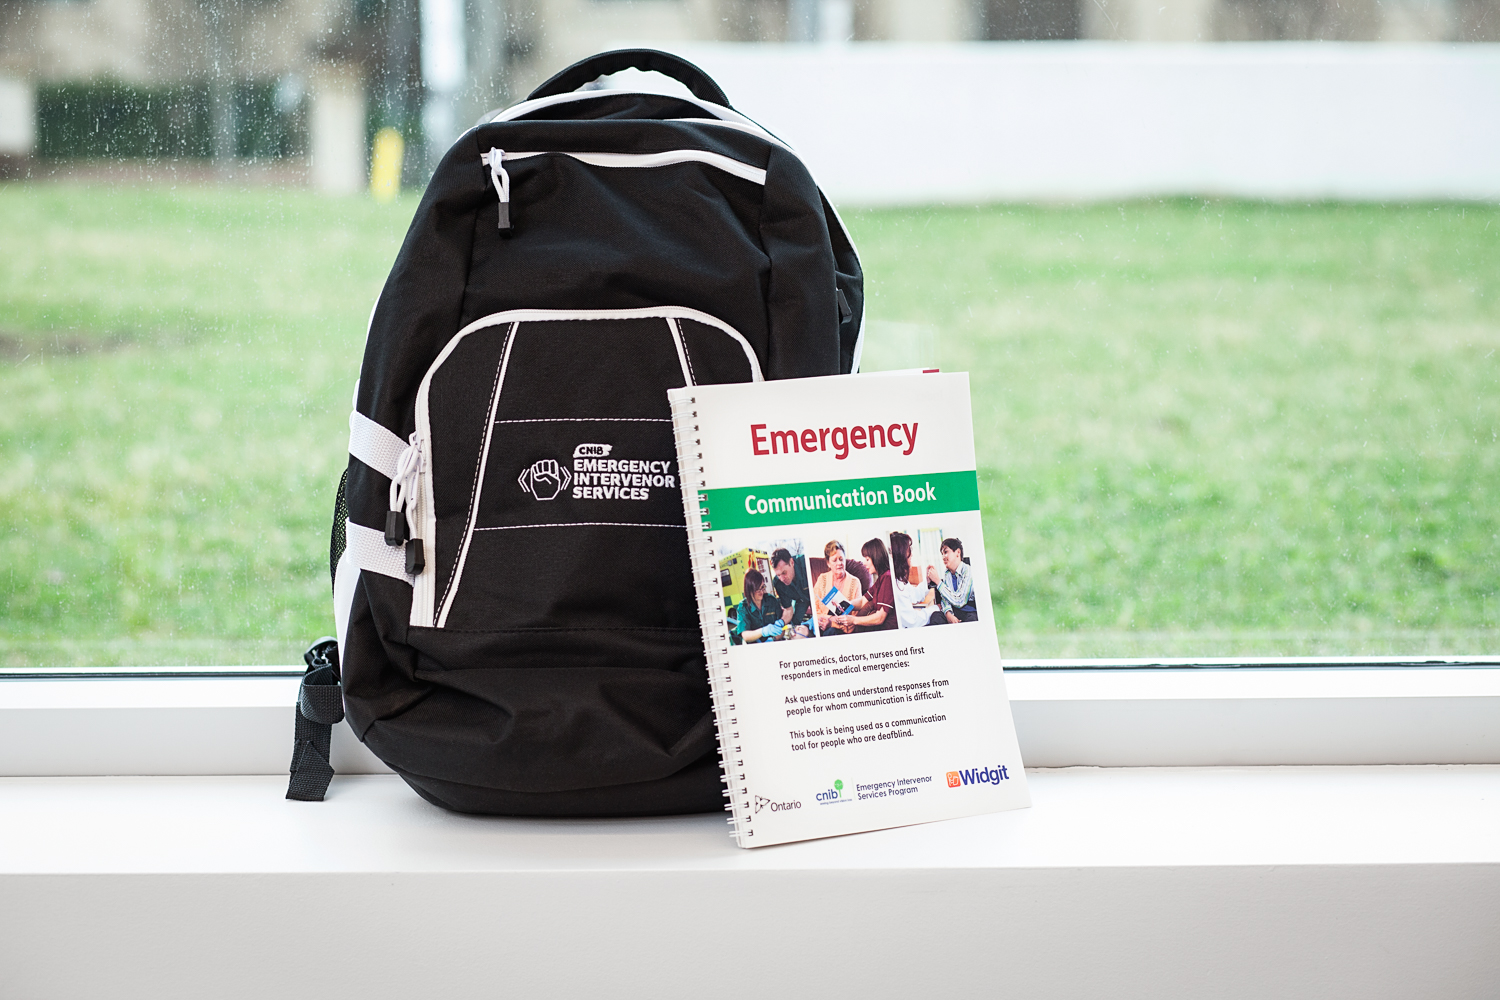 The DBCS Emergency Communication Kit. A black backpack with a book resting against it called, "Emergency Communication Book".